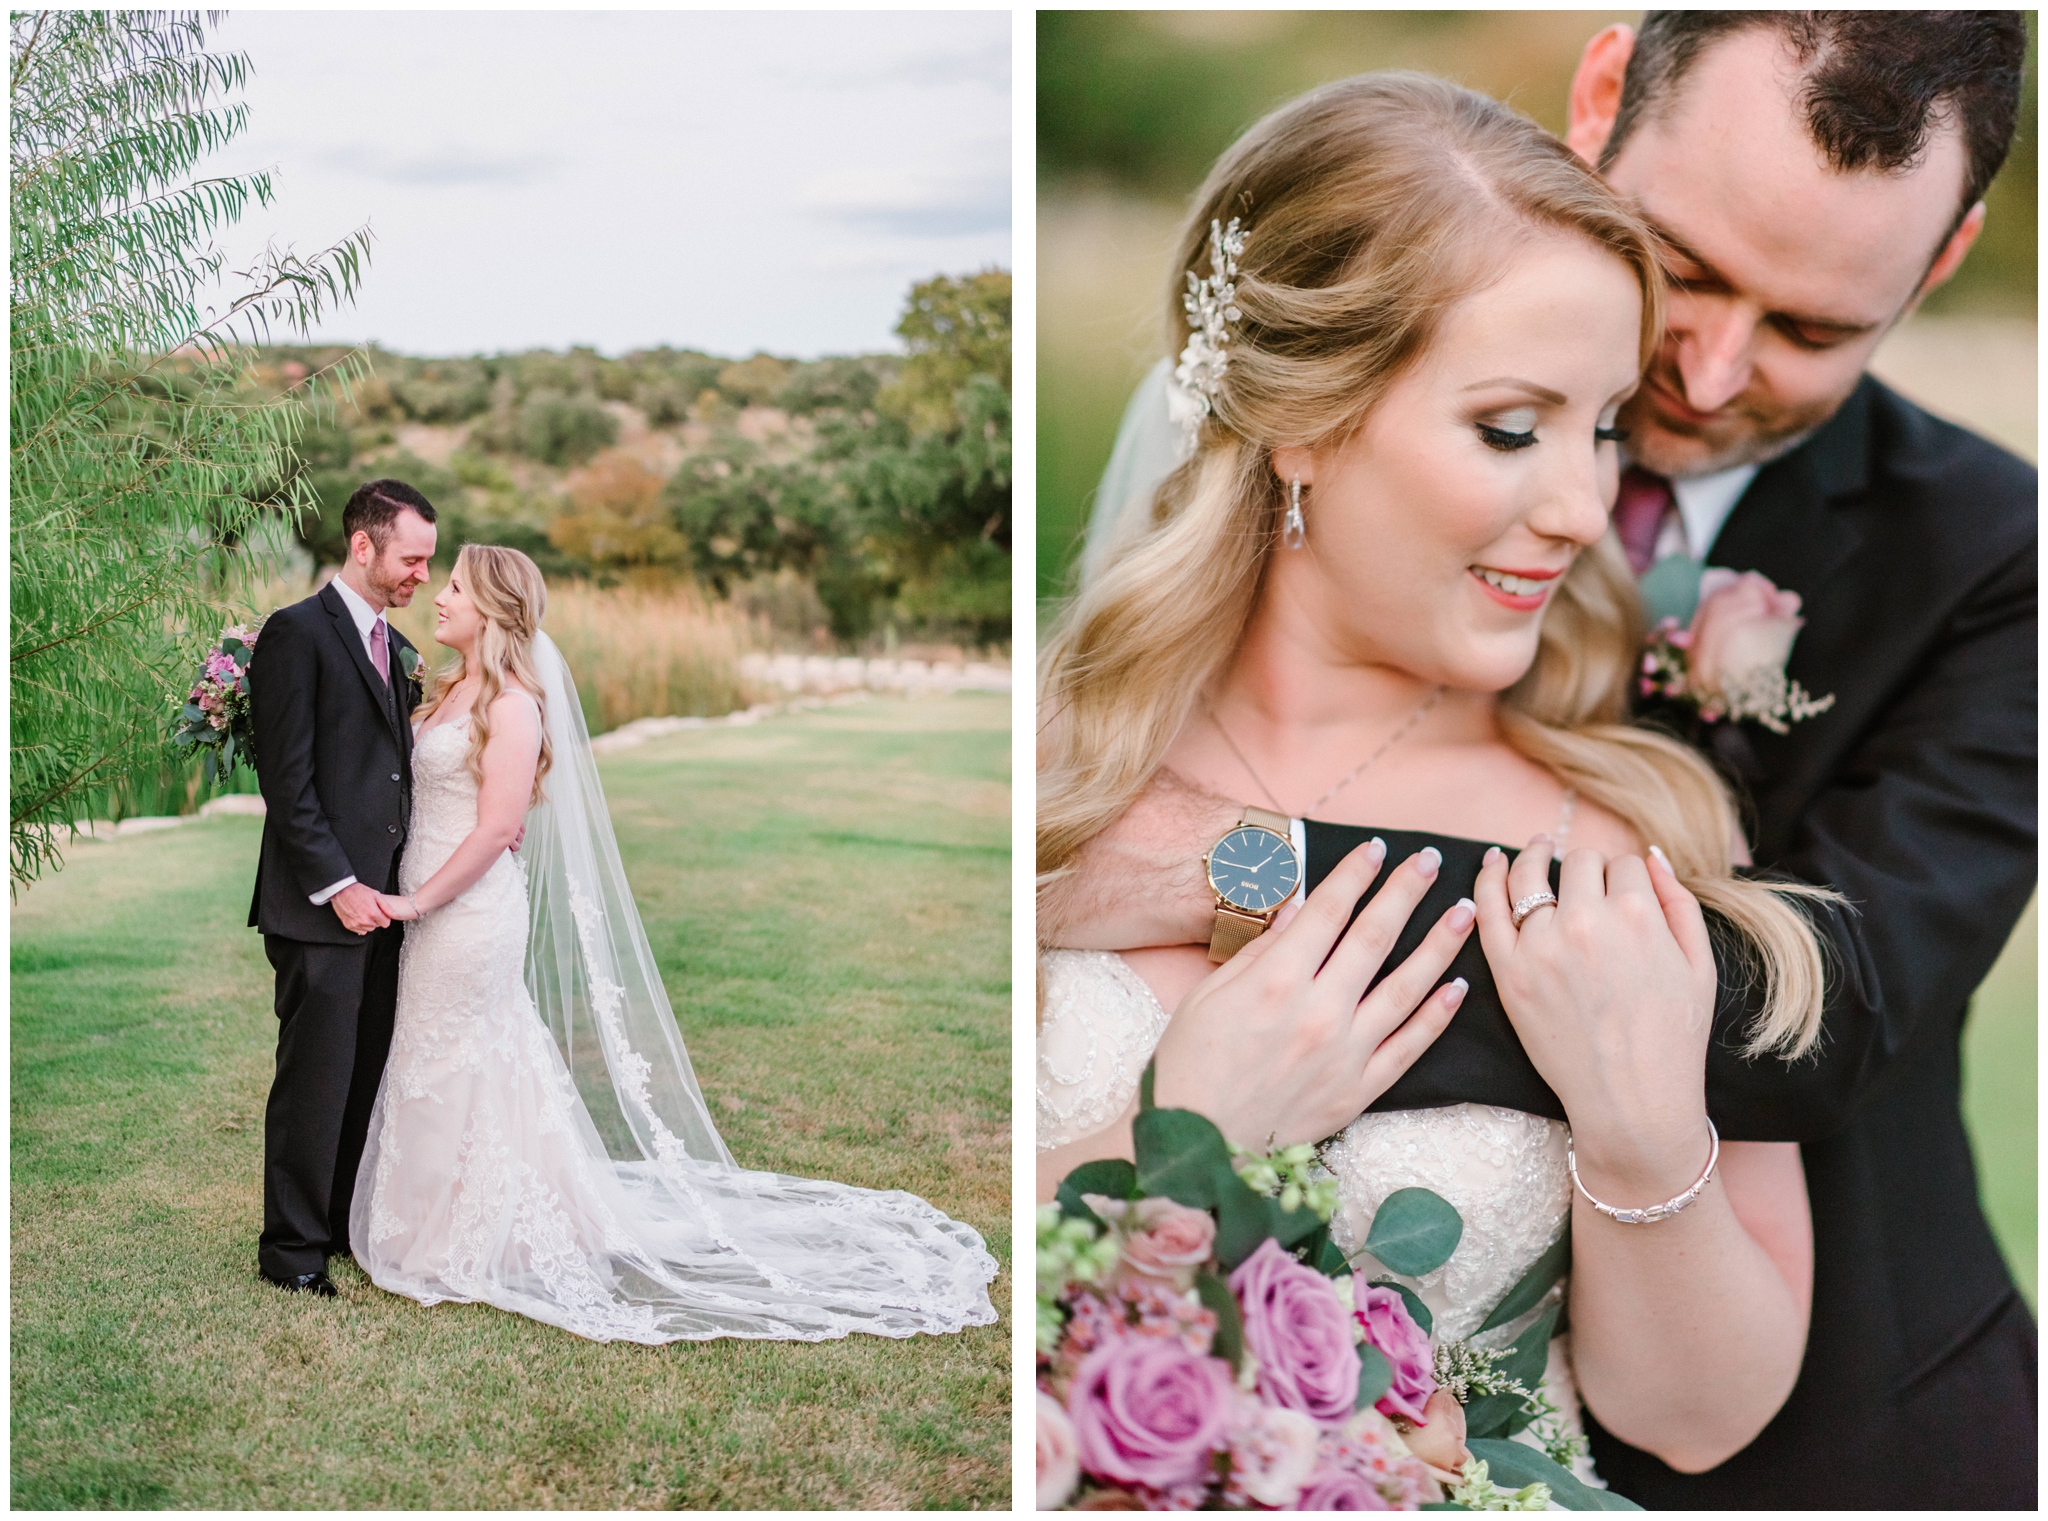 Bride and groom portraits at Hayes Hollow at Hidden Falls outside of Austin, Texas